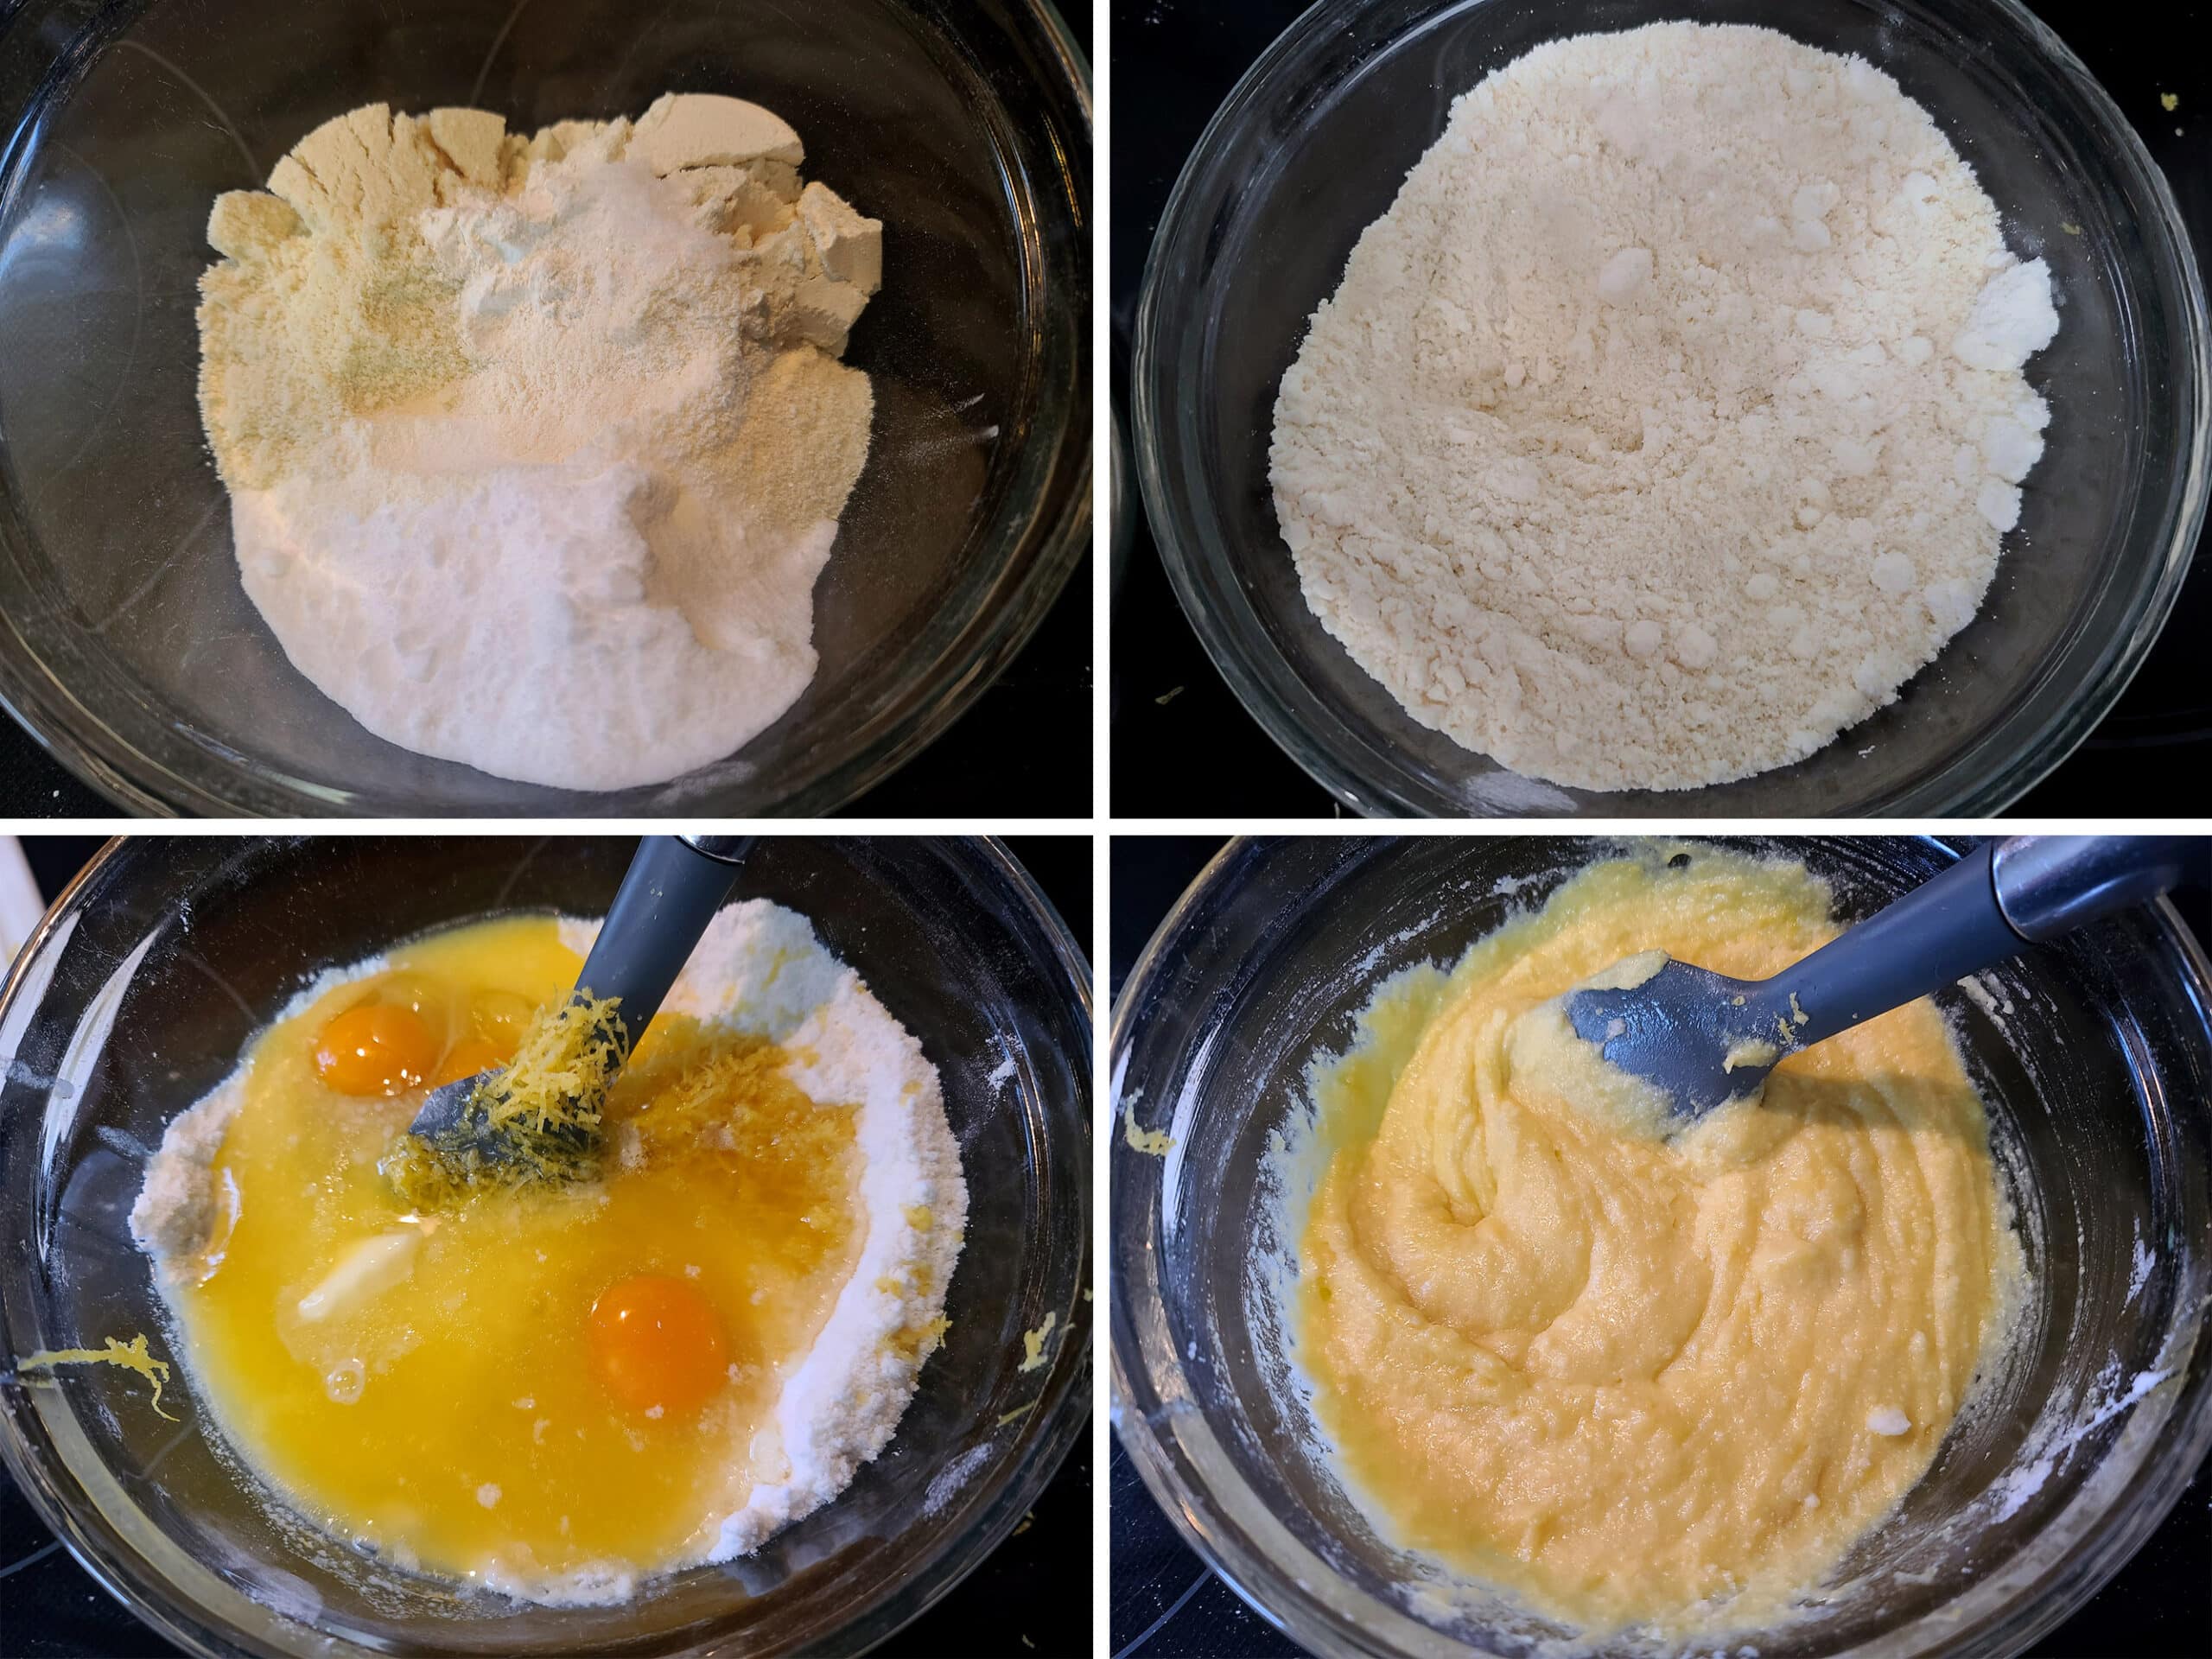 4 part image showing the dry ingredients being mixed, then the wet ingredients beaten in.